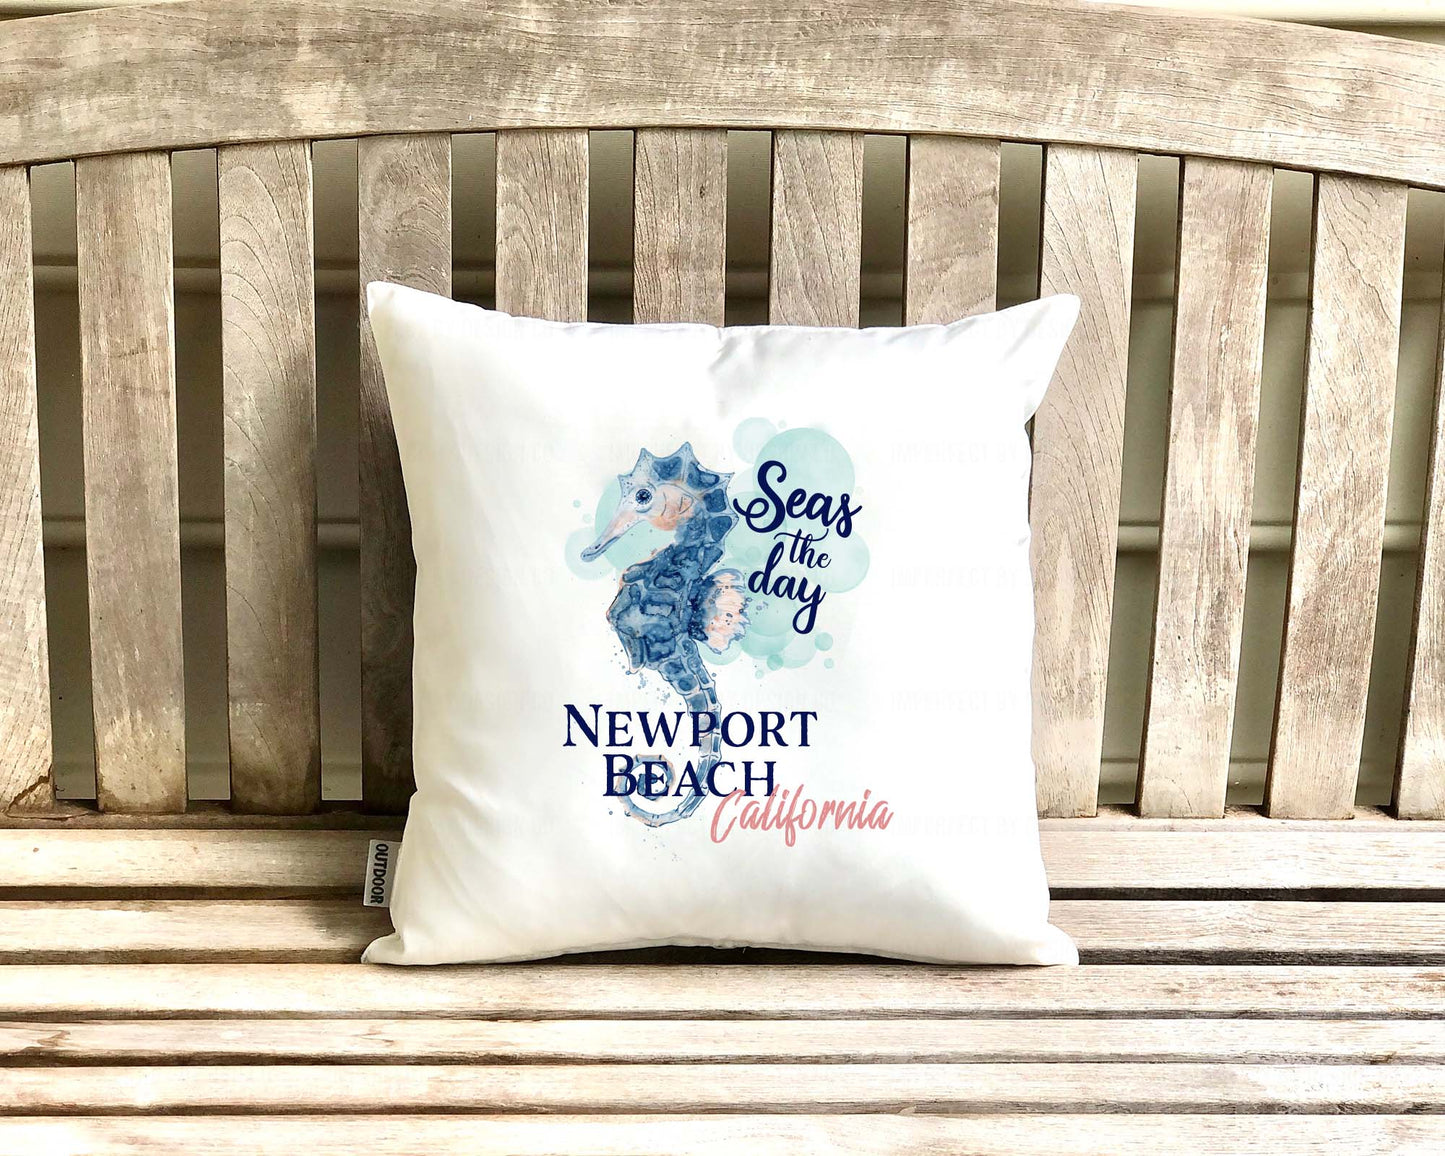 Coastal vibes outdoor pillow with aqua seahorse and 'Seas the day' text with city and state | imperfect by design co